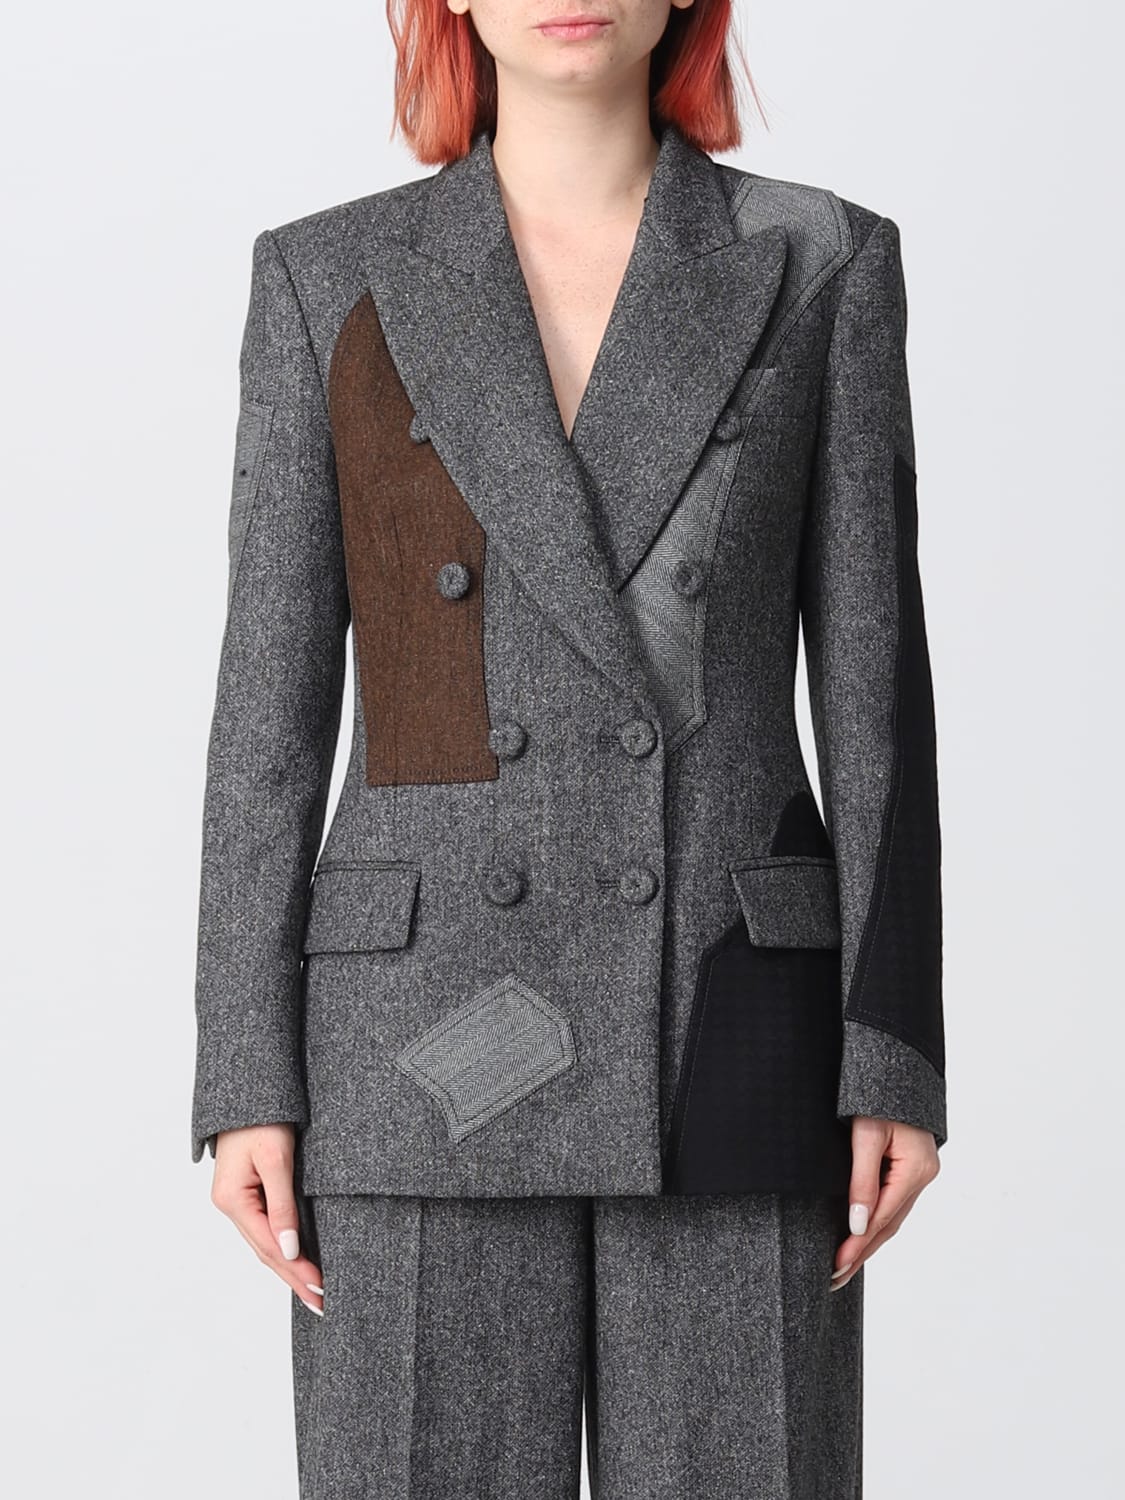 Moschino patchwork double-breasted blazer - Grey